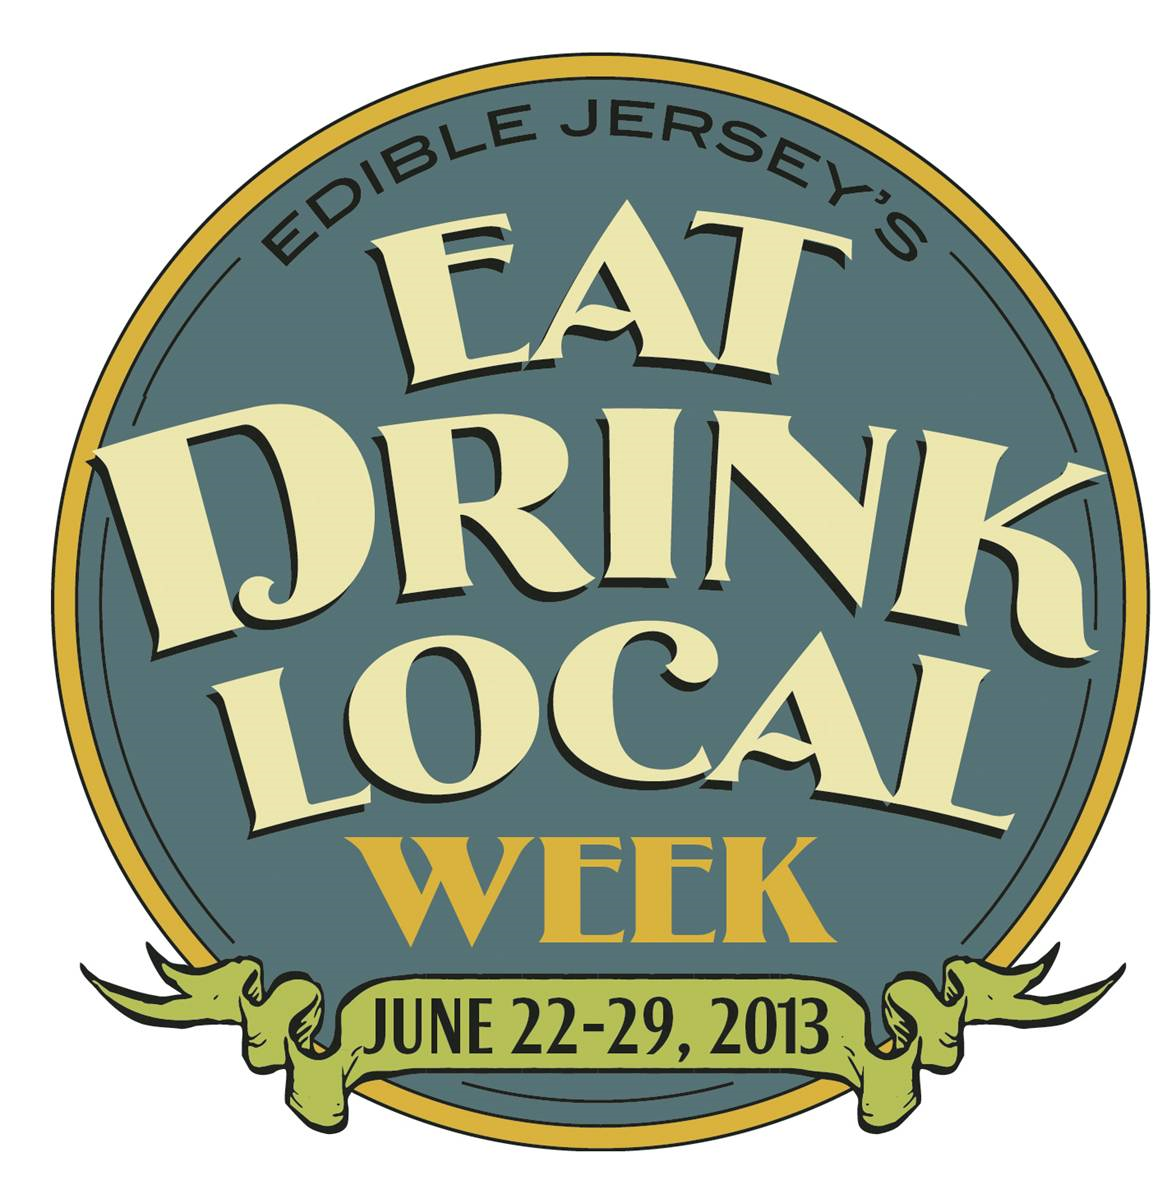 Eat and Drink. Eat me logo. Local weekend